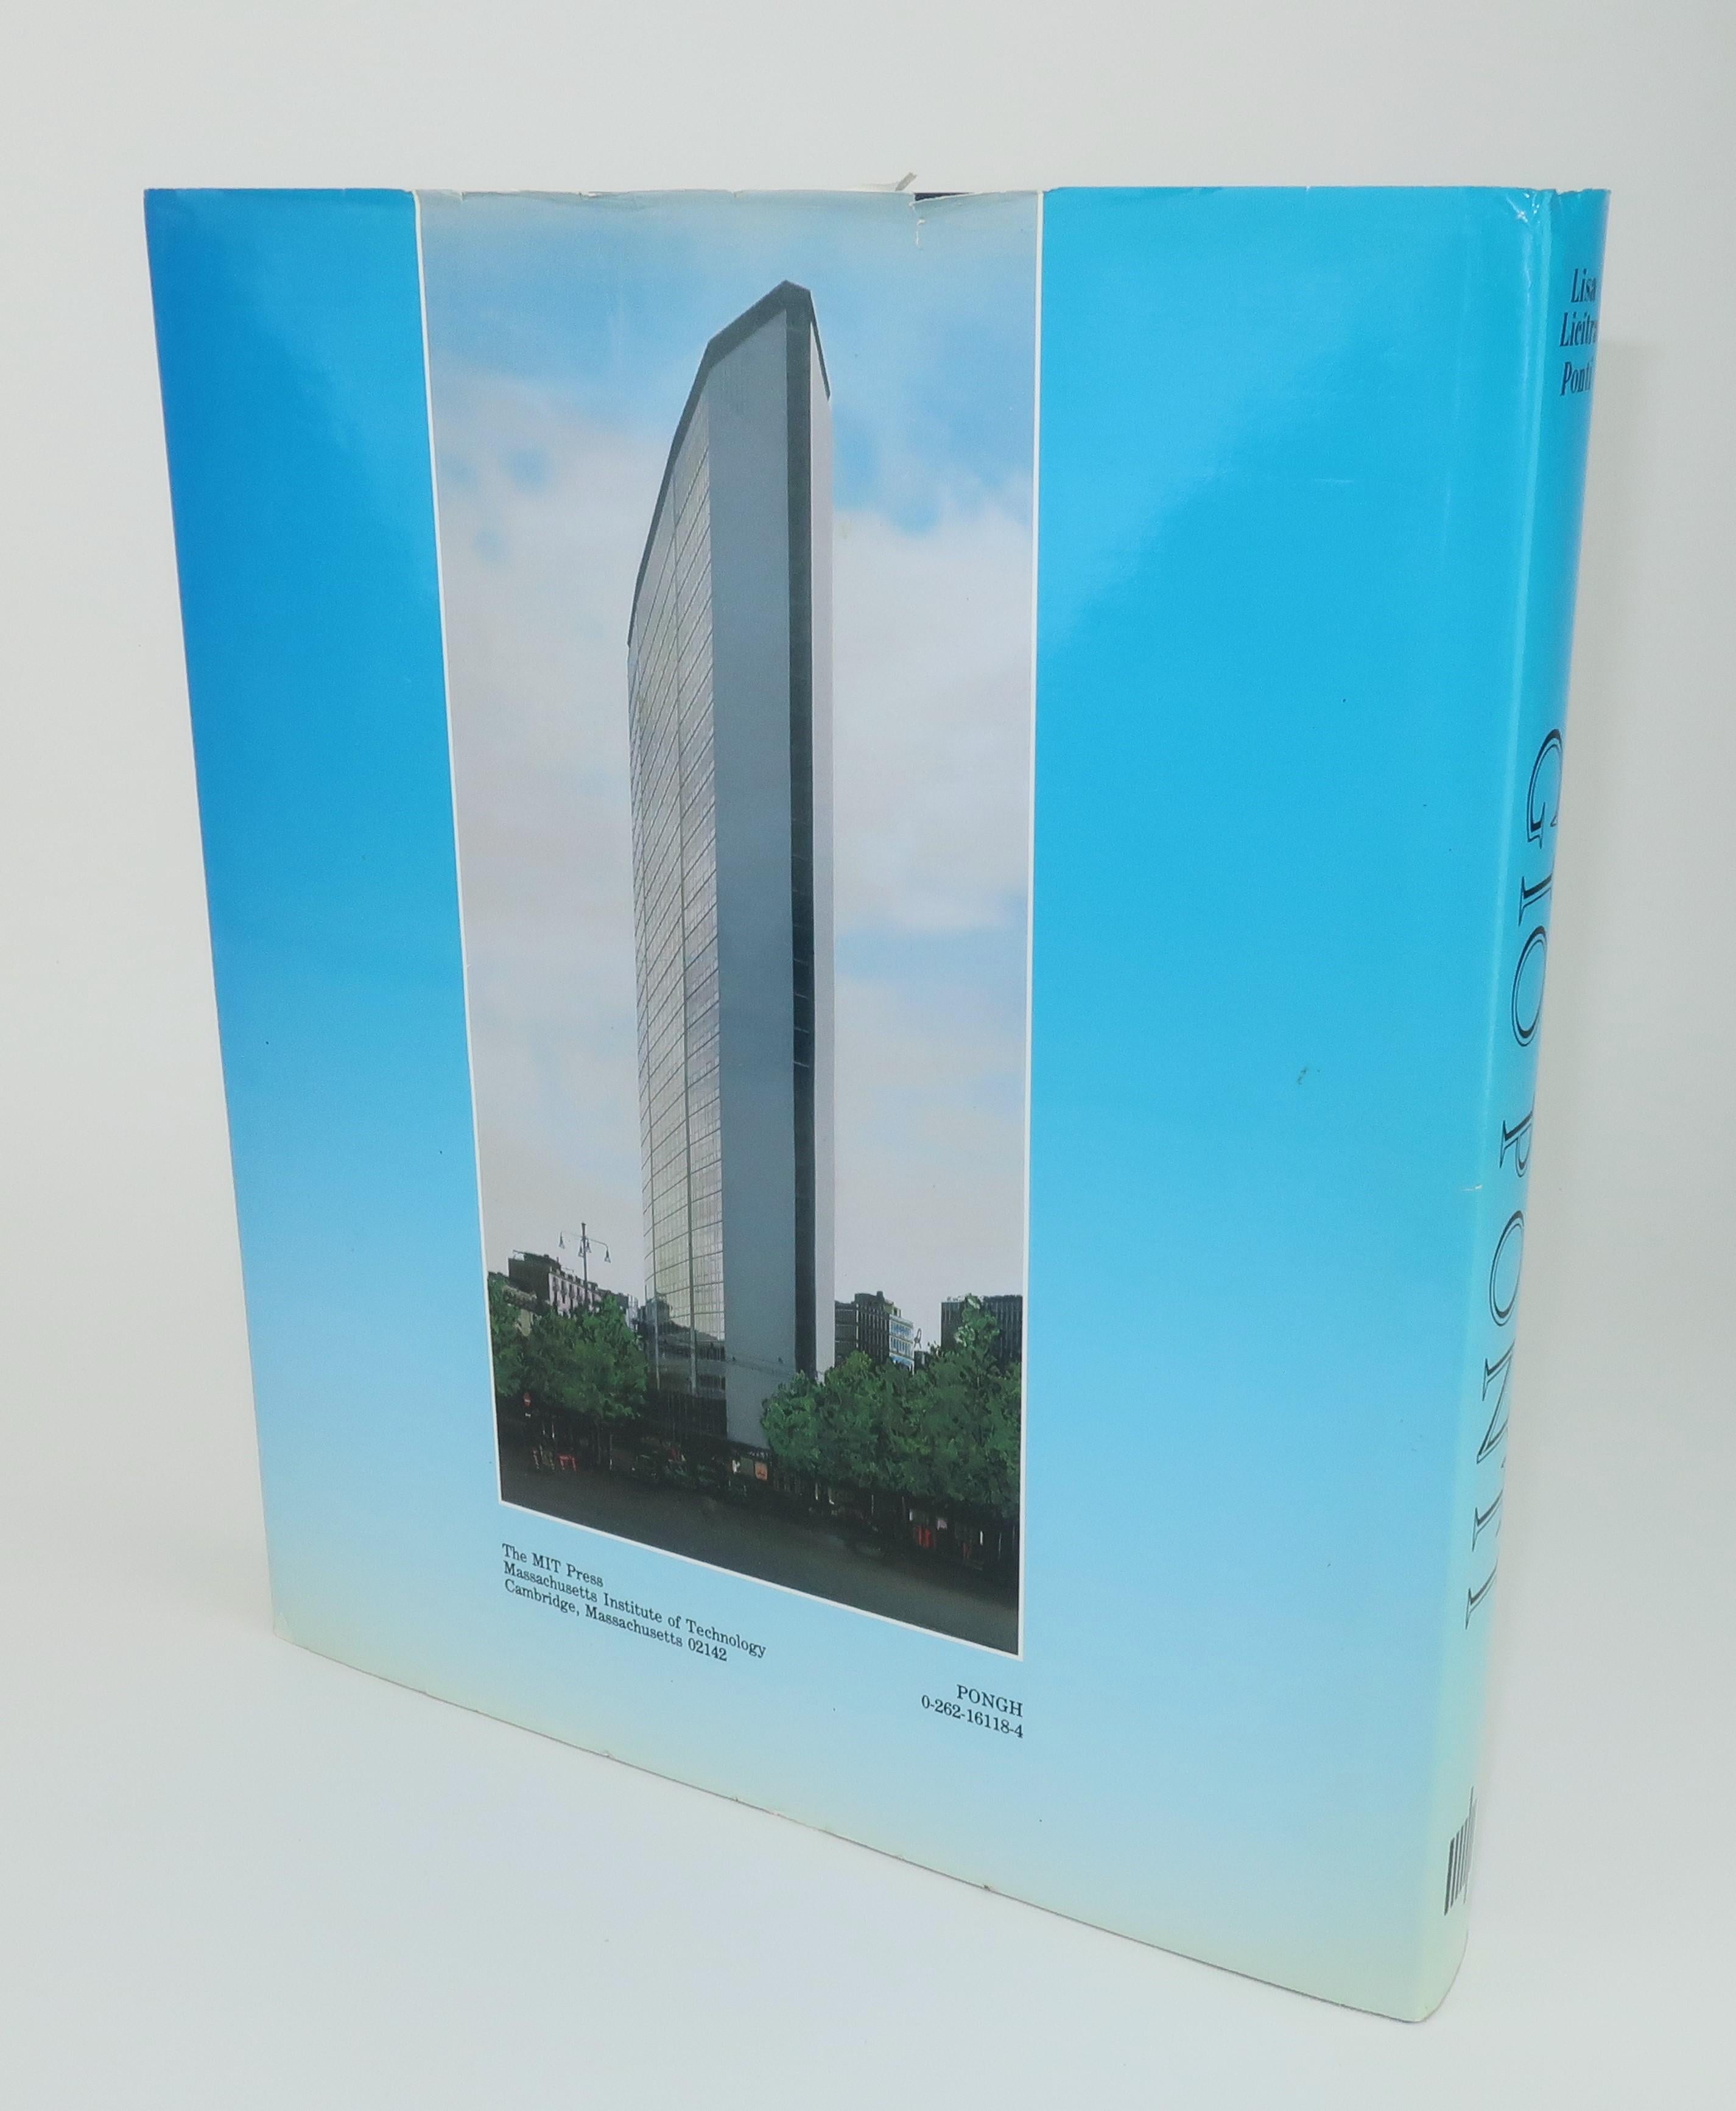 Beautifully published 1990 book entitled, Gio Ponti The Complete Work 1923-1978, by his daughter and oft time collaborator, Lisa Licitra Ponti. The book is 288 pages filled with photographs, drawings and text surveying Ponti's works including